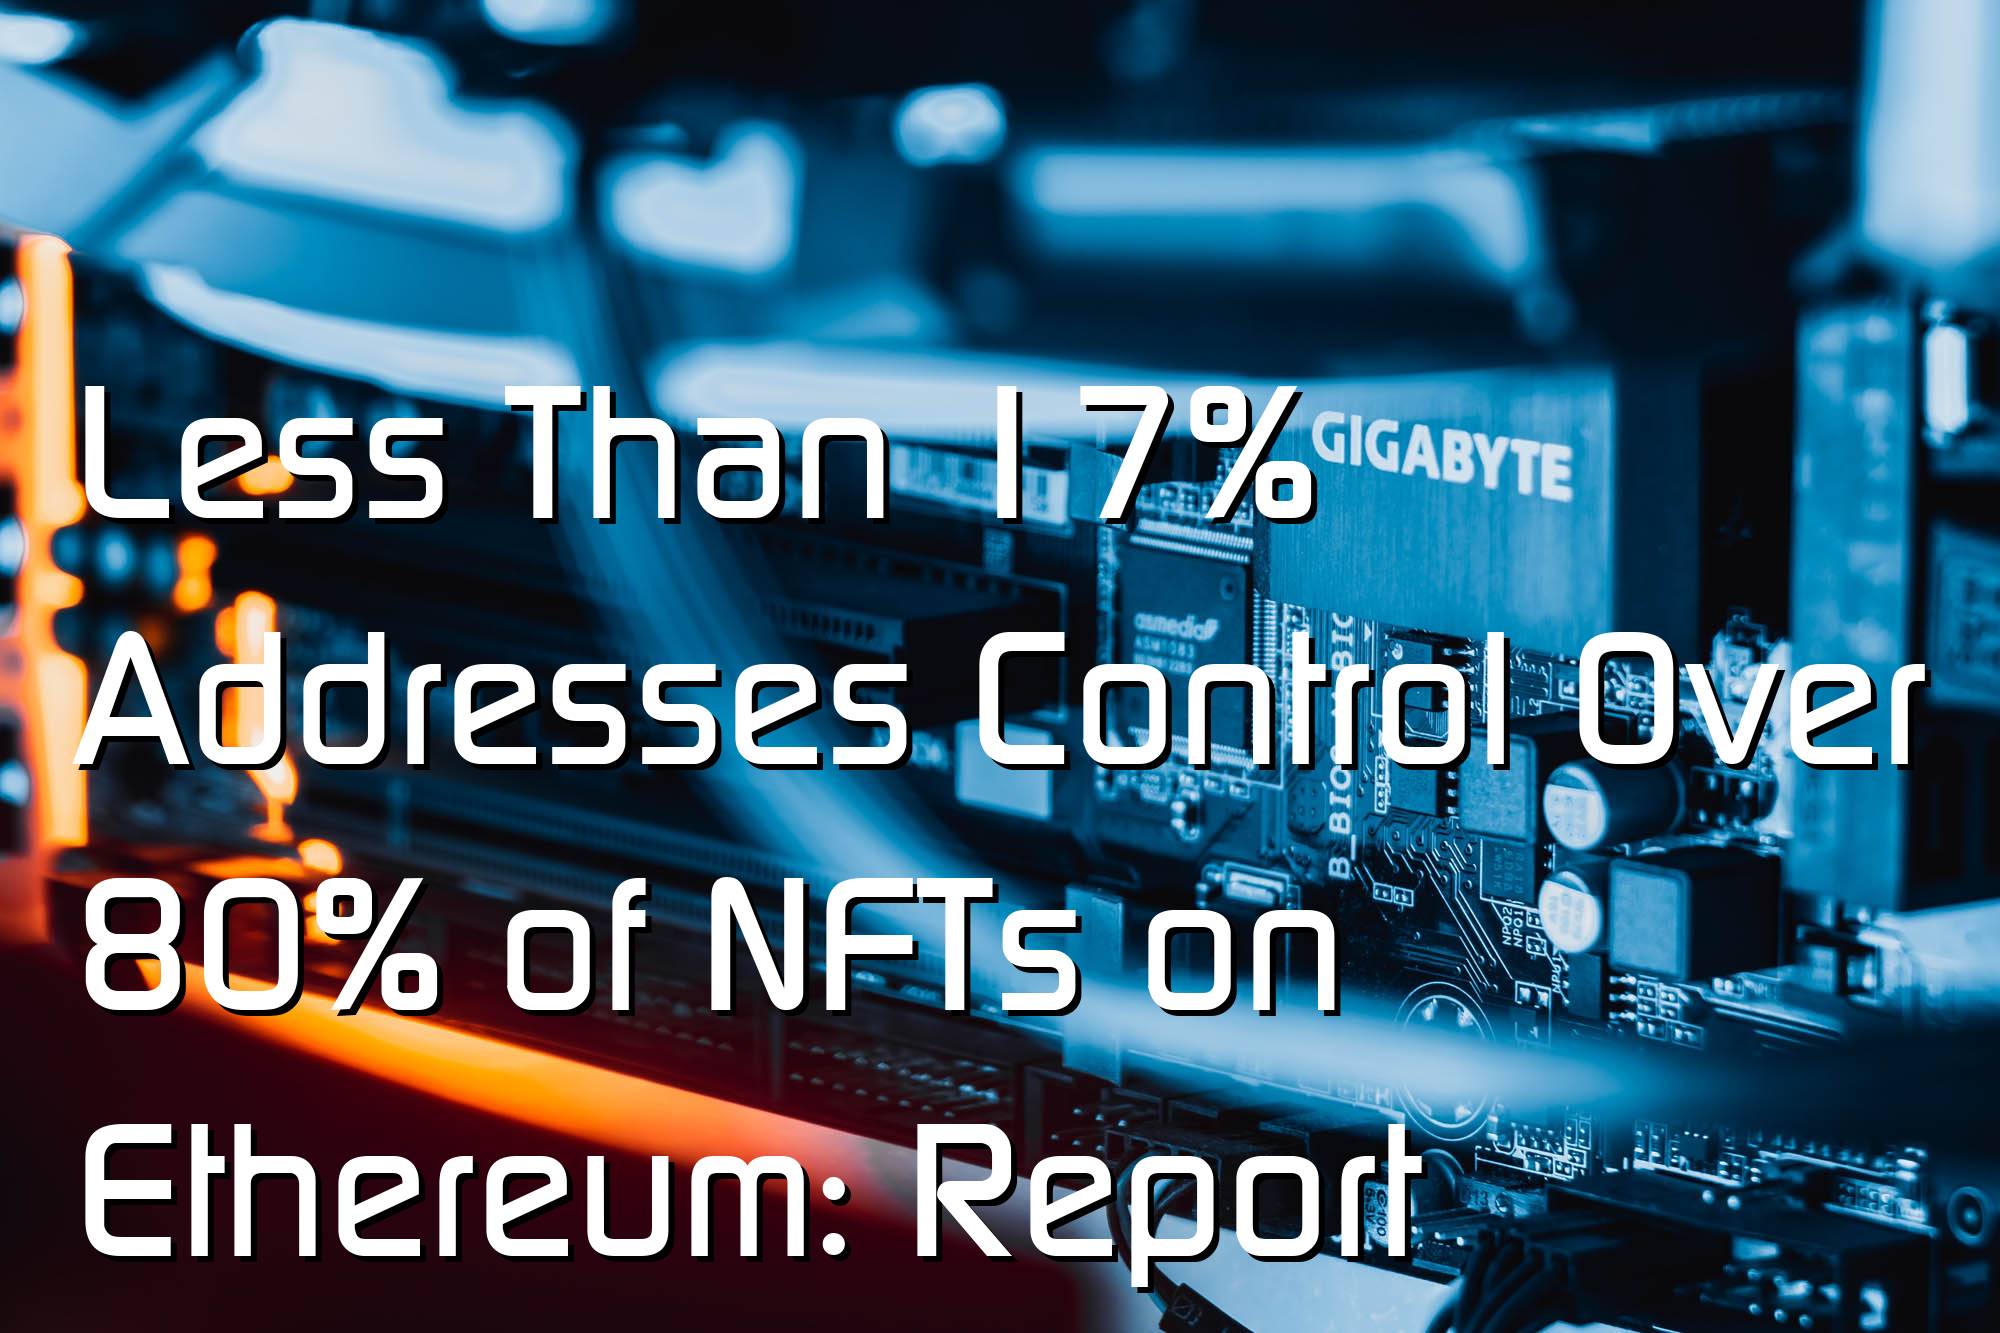 @$61114.95 Less Than 17% Addresses Control Over 80% of NFTs on Ethereum: Report